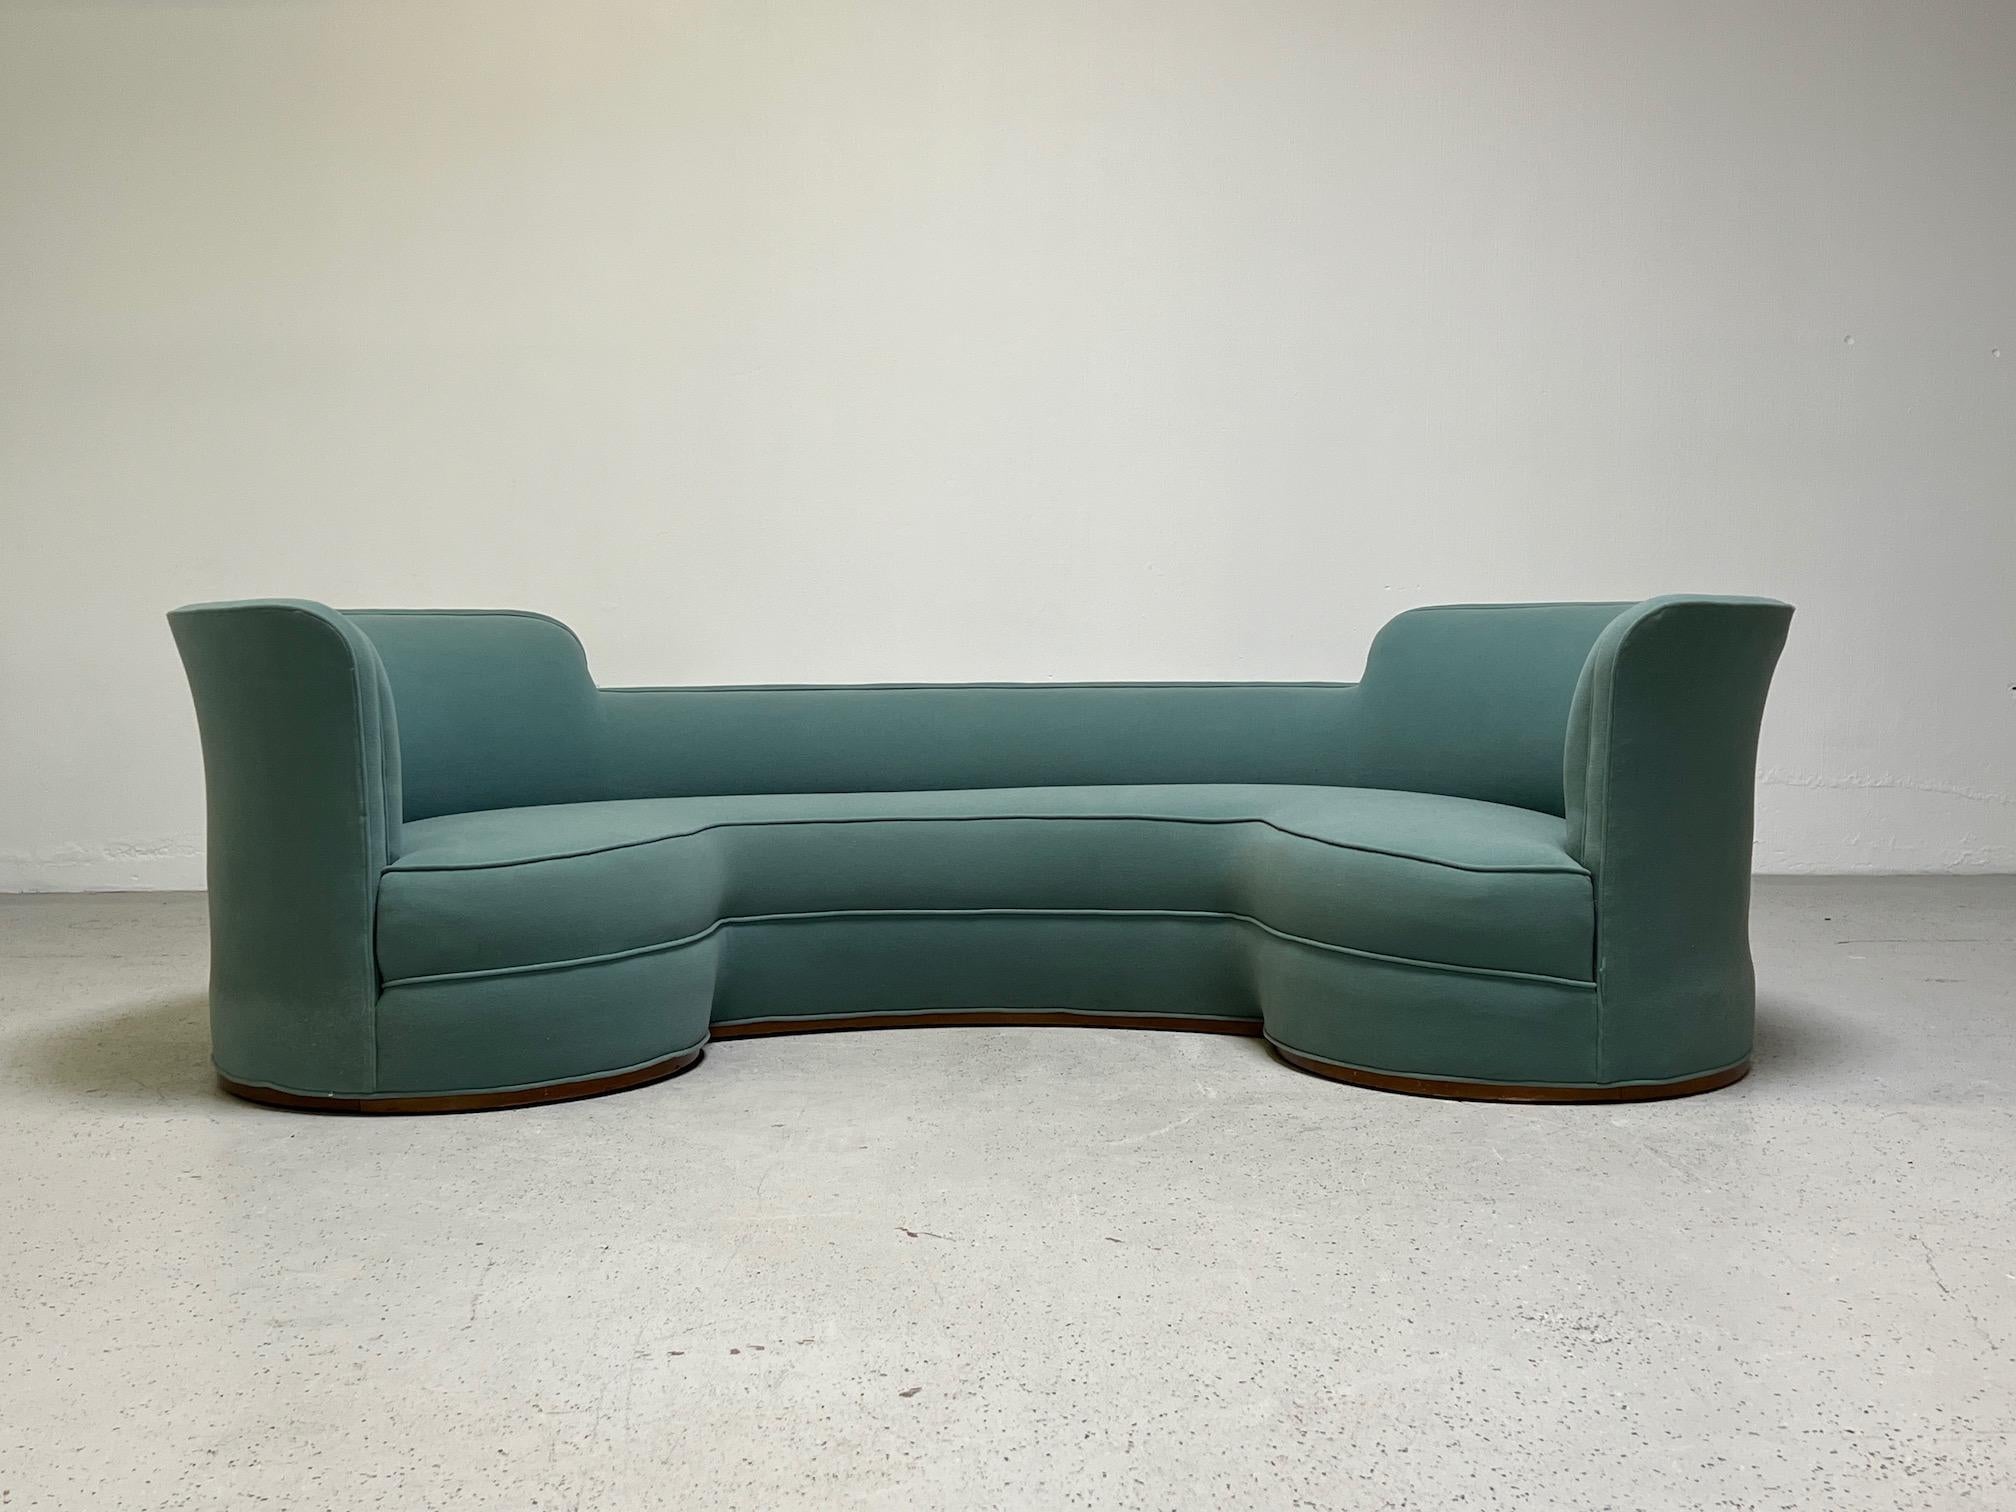  Early and rare oasis sofa model #5200 designed by Edward Wormley for Dunbar. Pair available. 